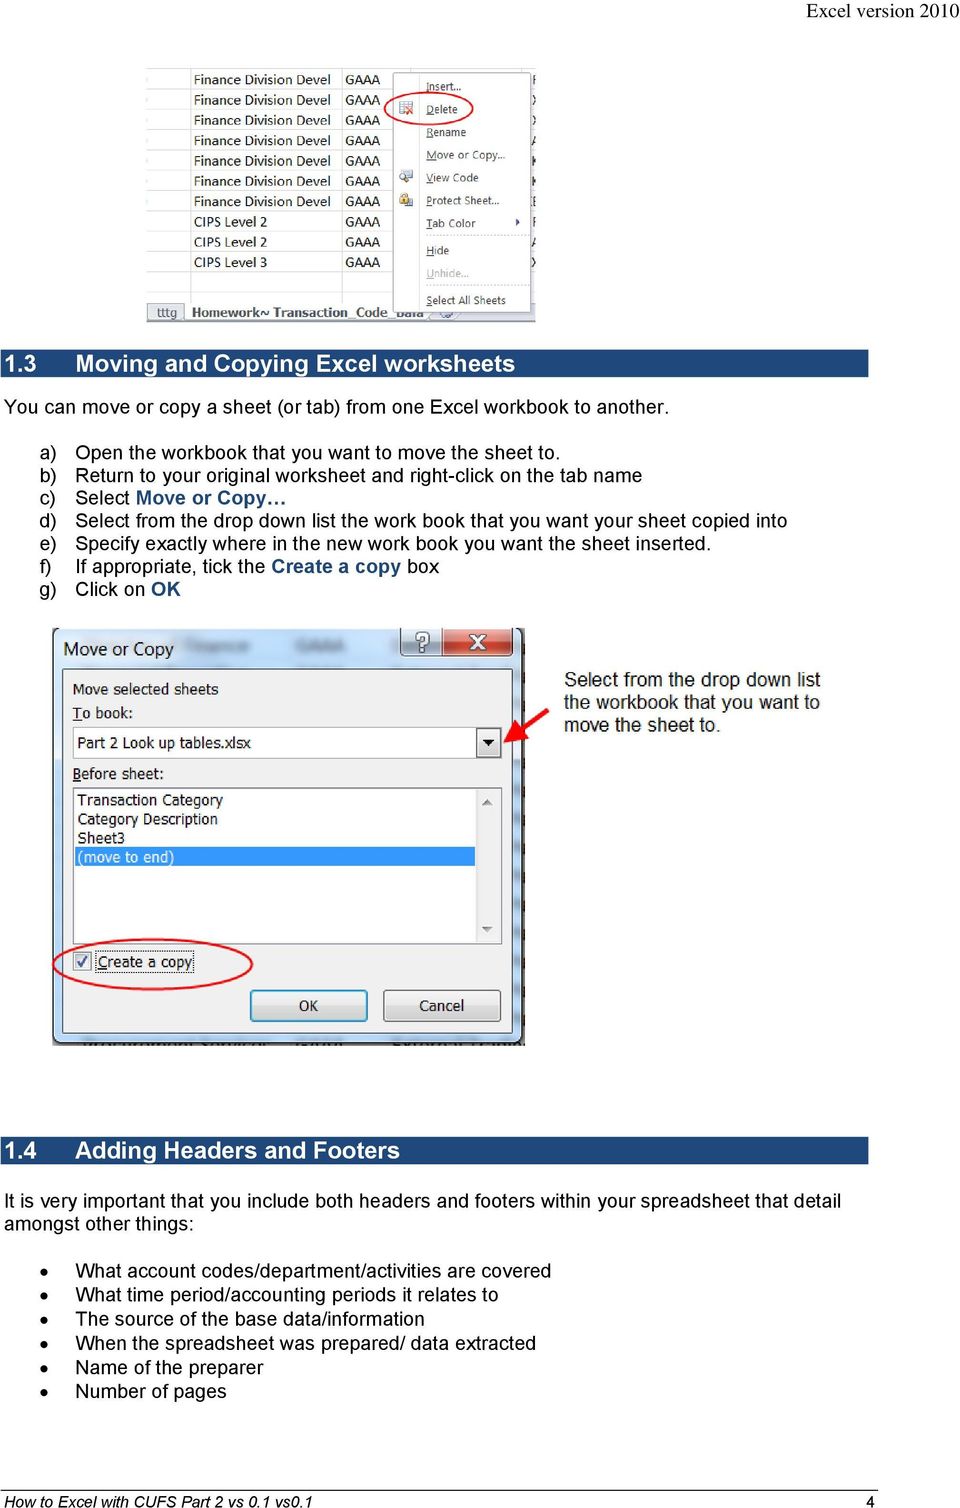 where in the new work book you want the sheet inserted. f) If appropriate, tick the Create a copy box g) Click on OK 1.